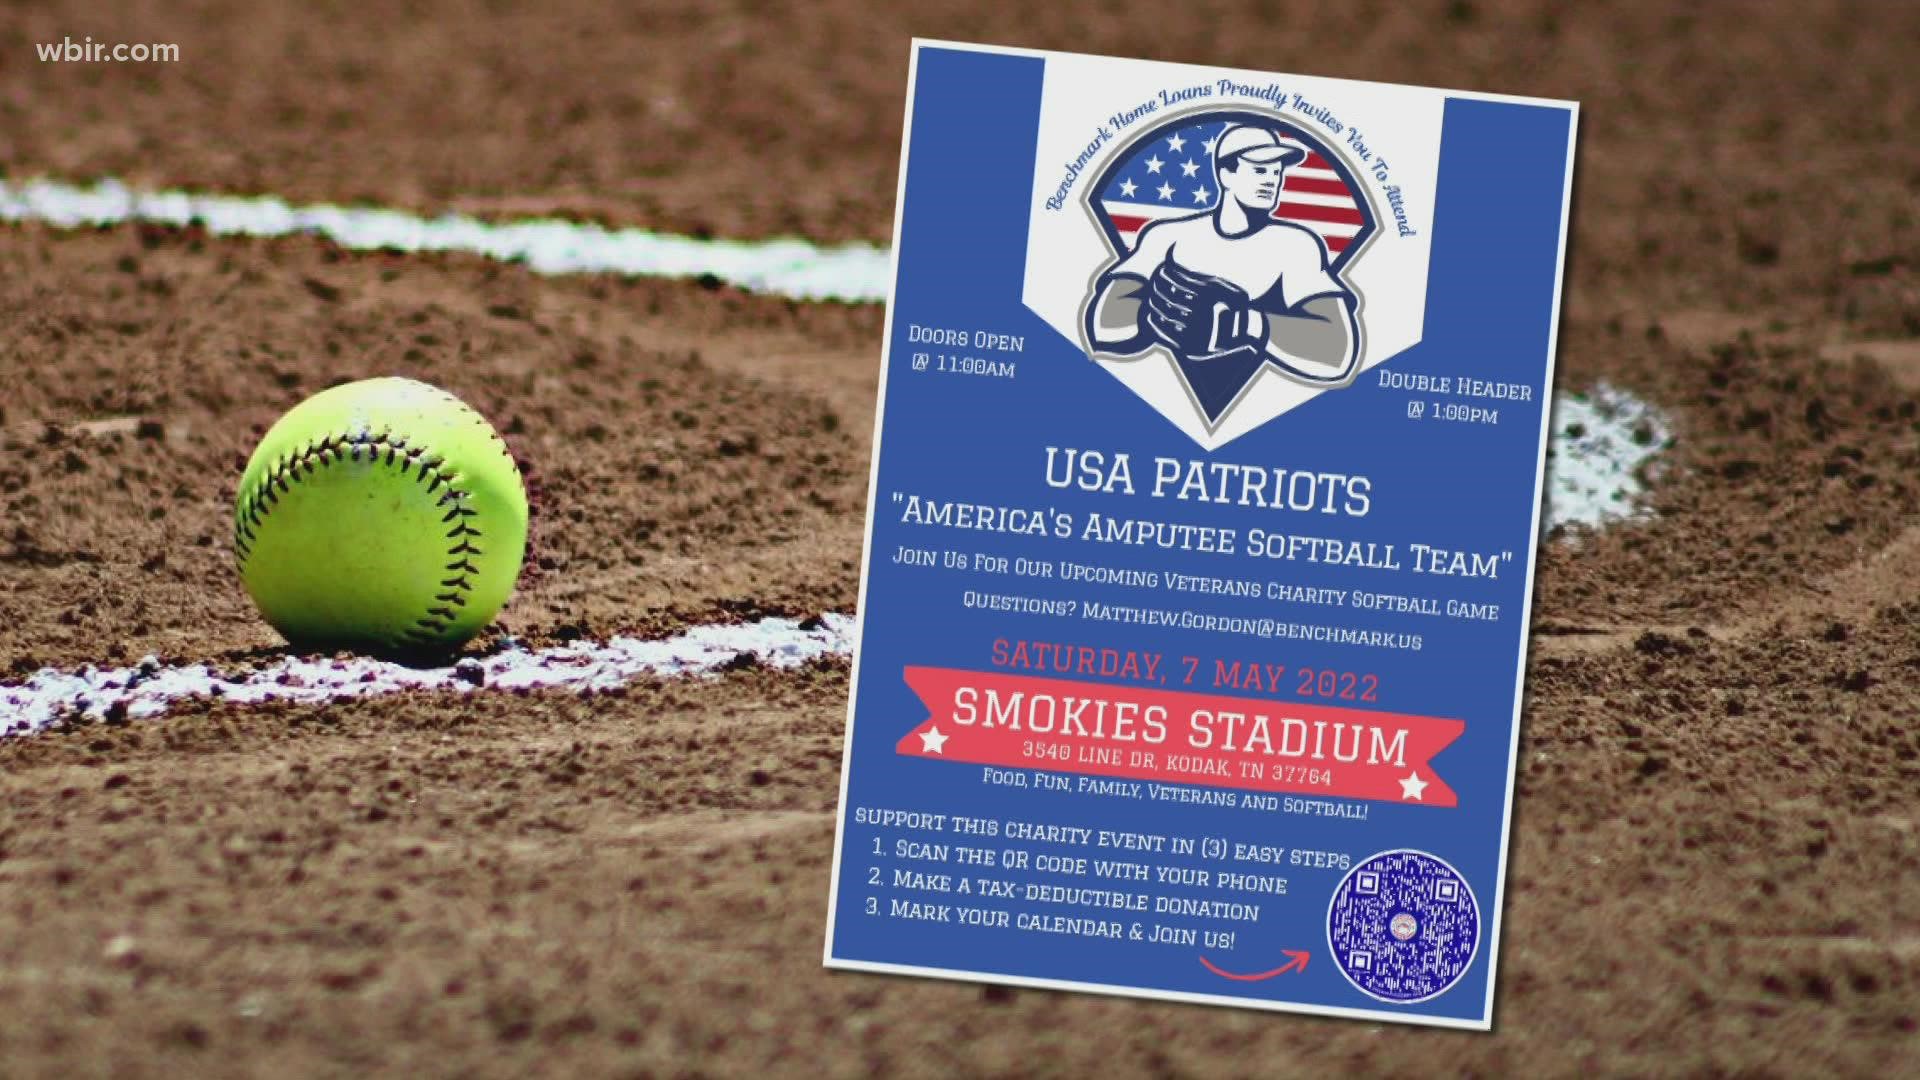 The game at Smokies Stadium is meant to raise awareness and funders for veterans in our community and beyond.